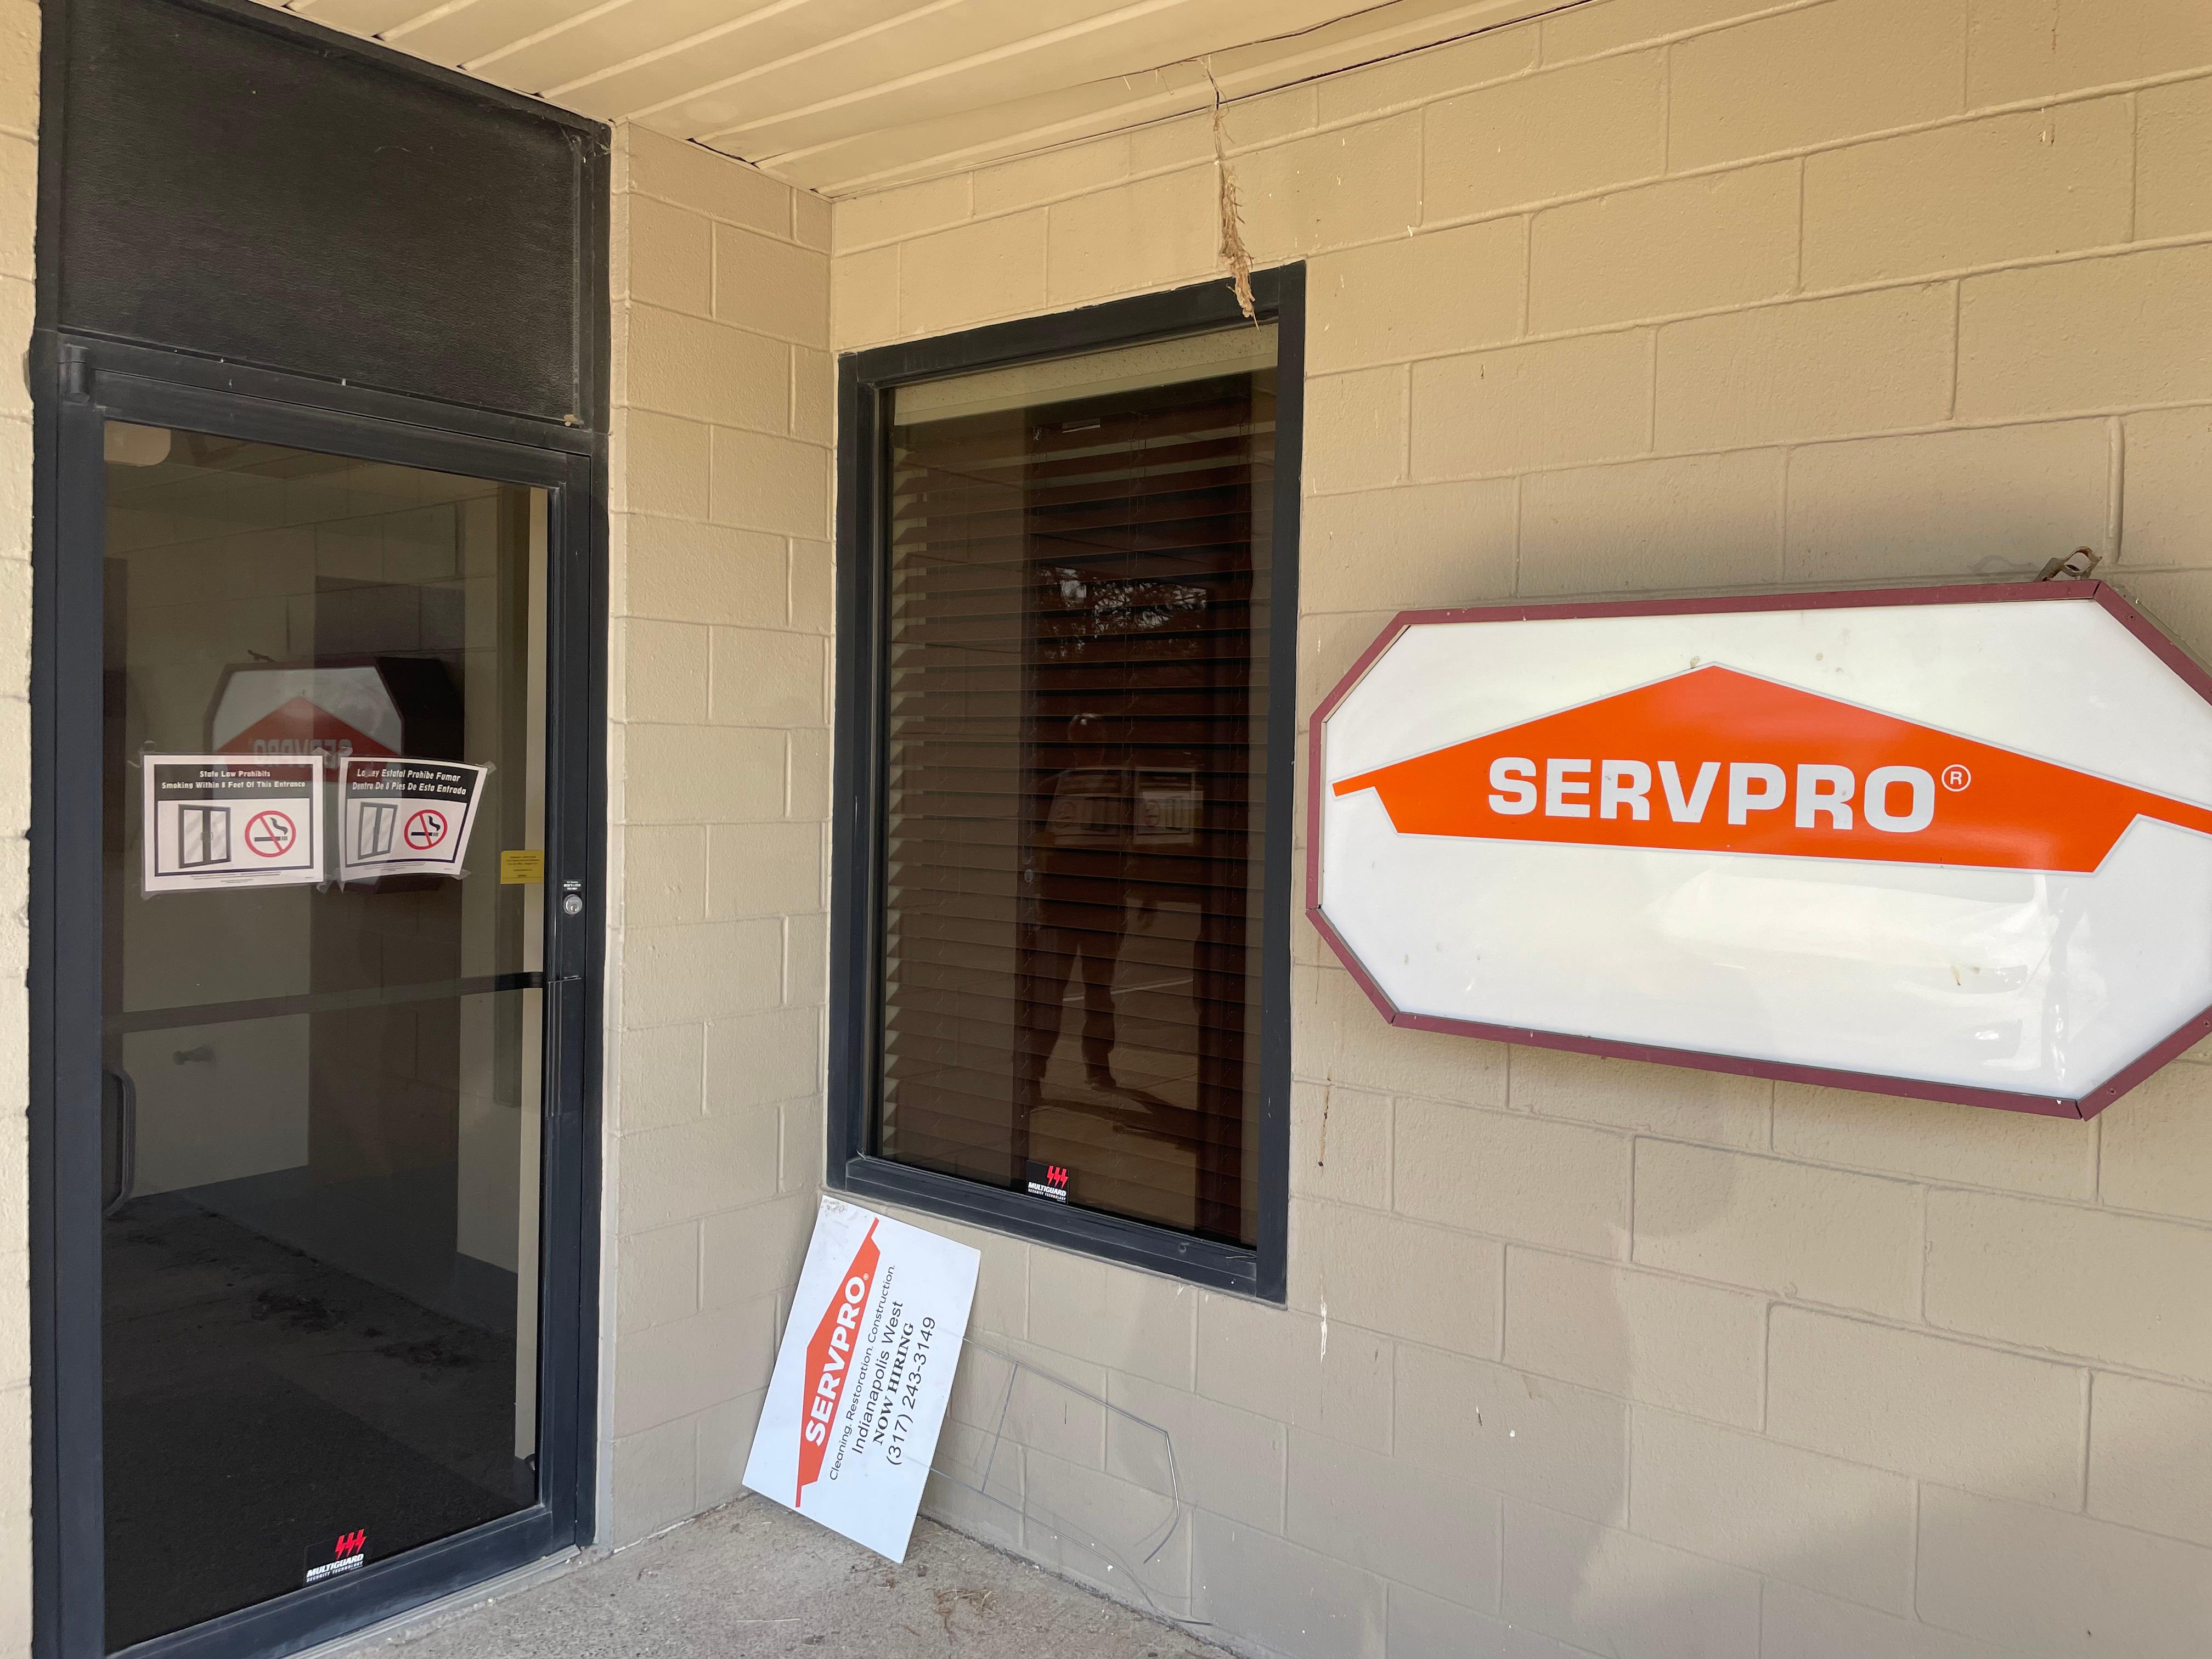 SERVPRO® Fire & Water Damage Cleanup and Restoration